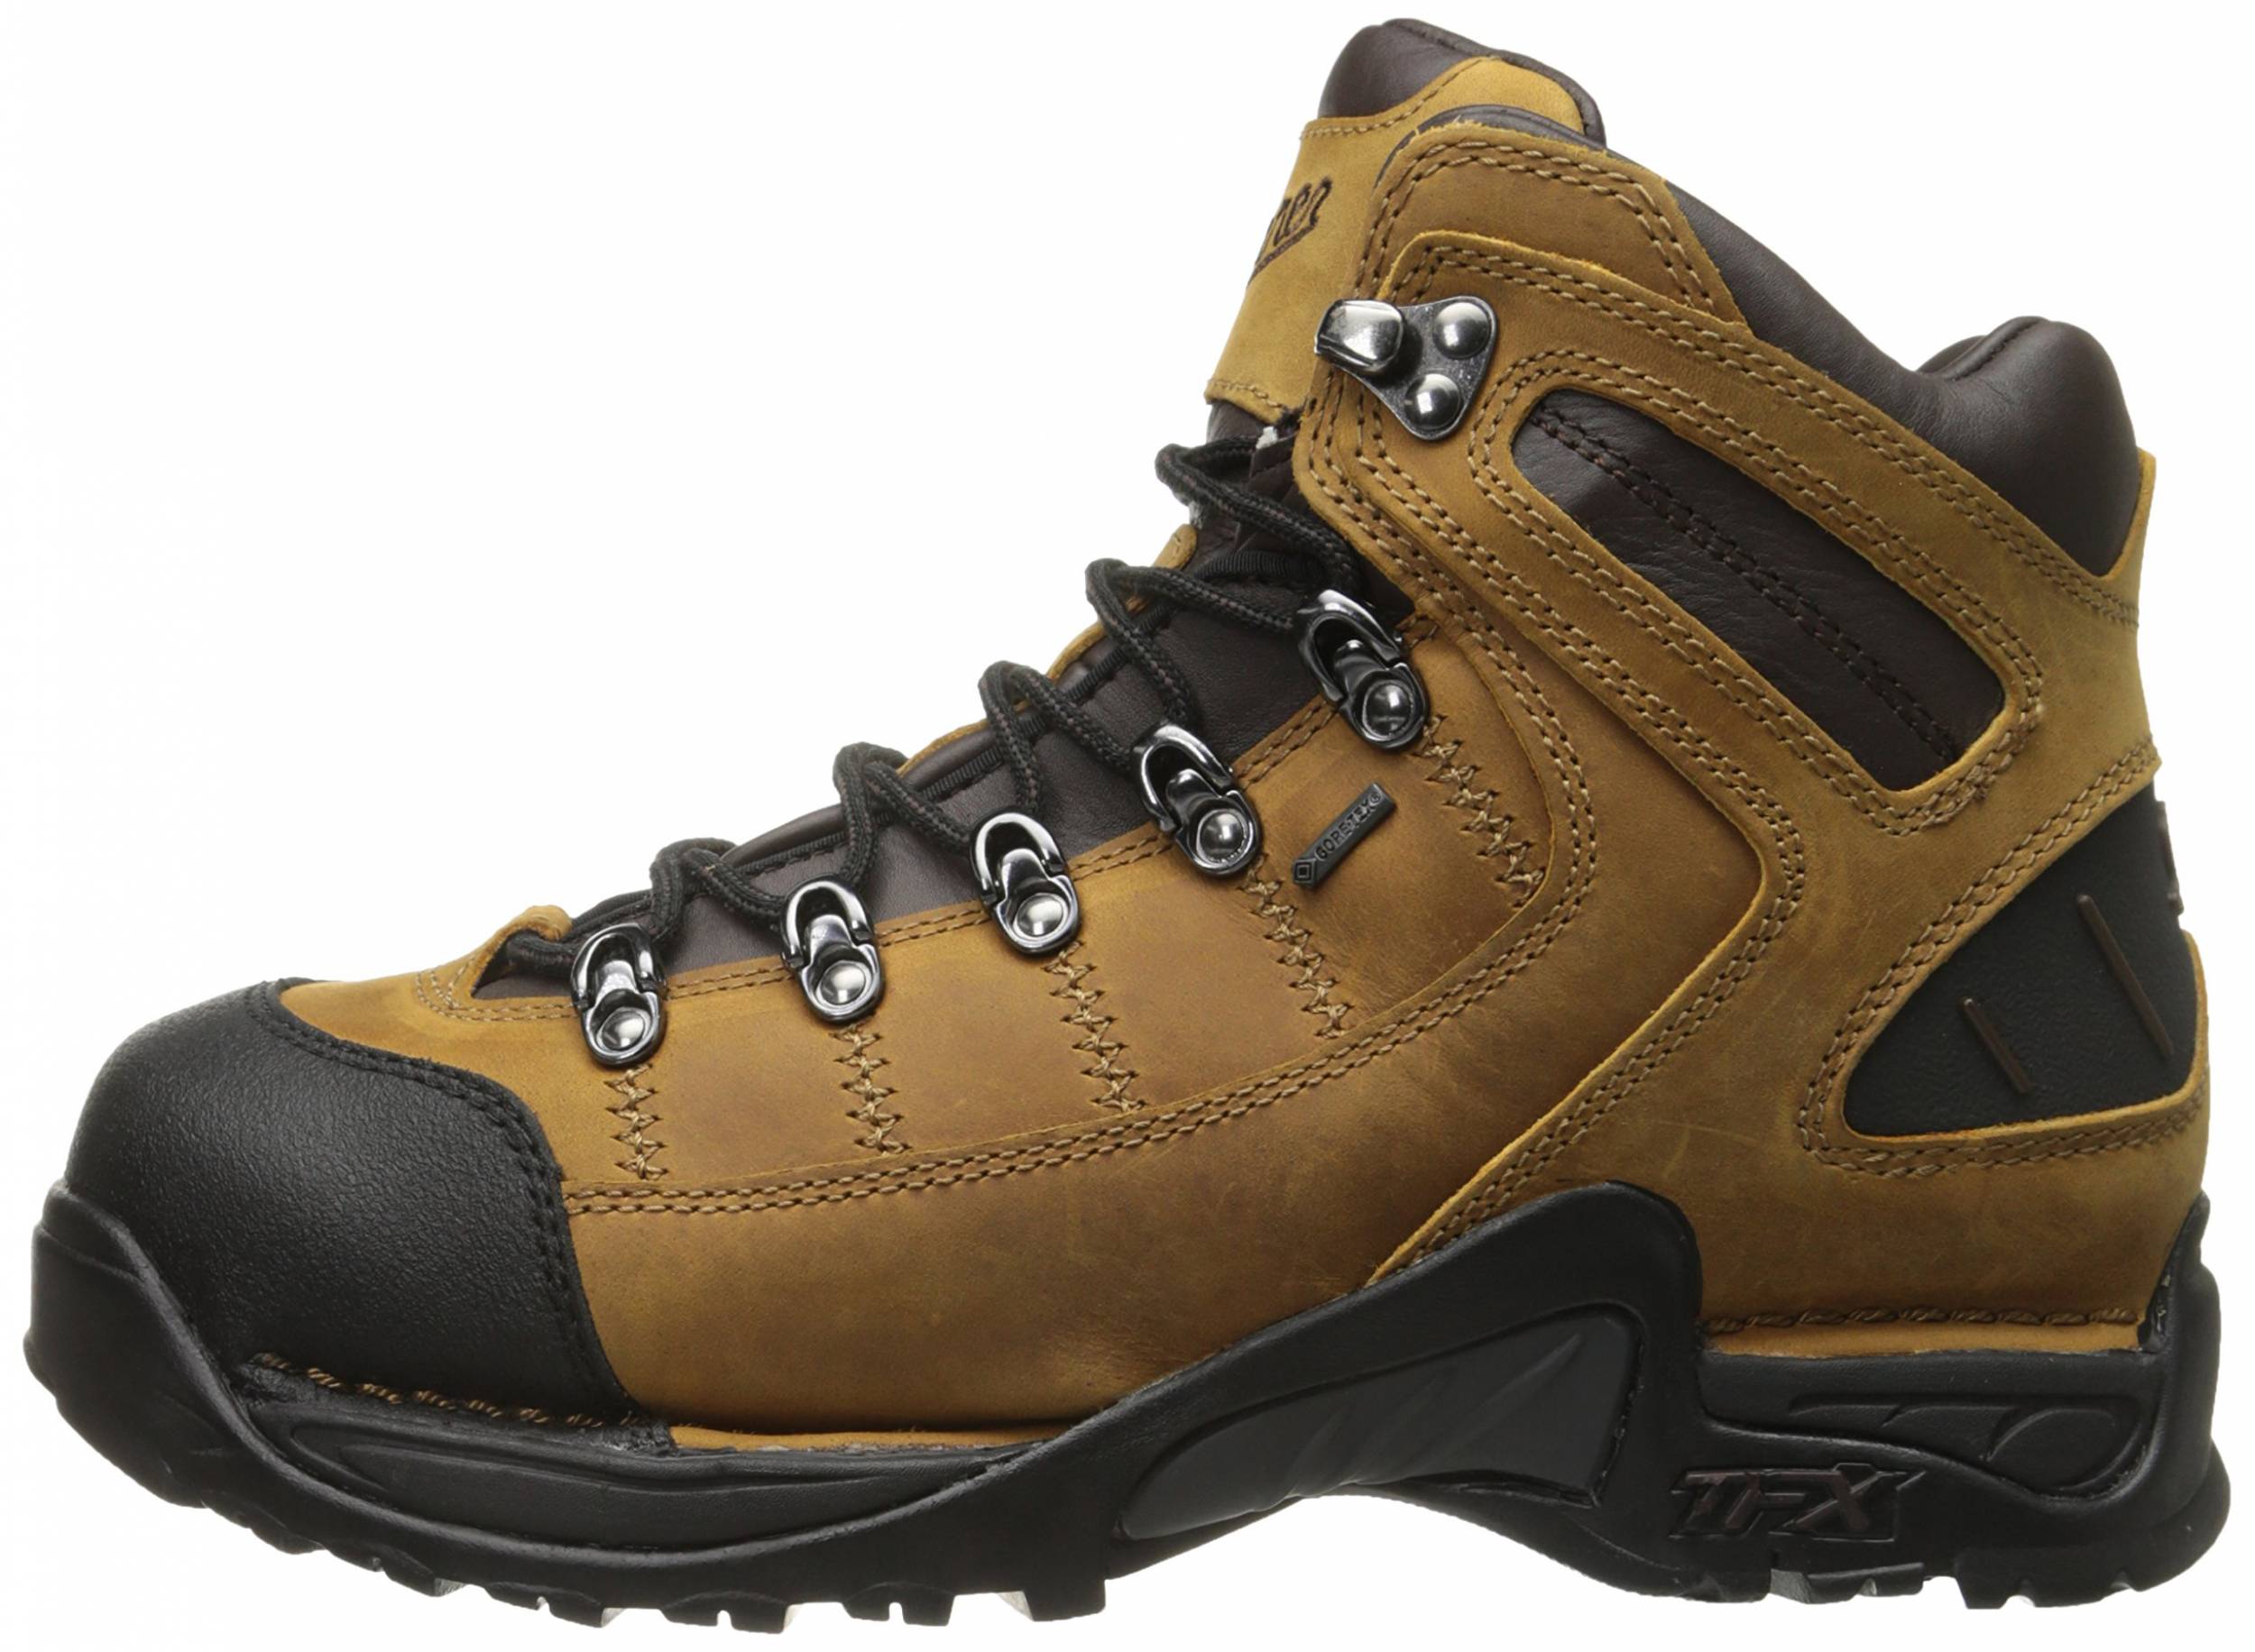 Only $192 + Review of Danner 453 